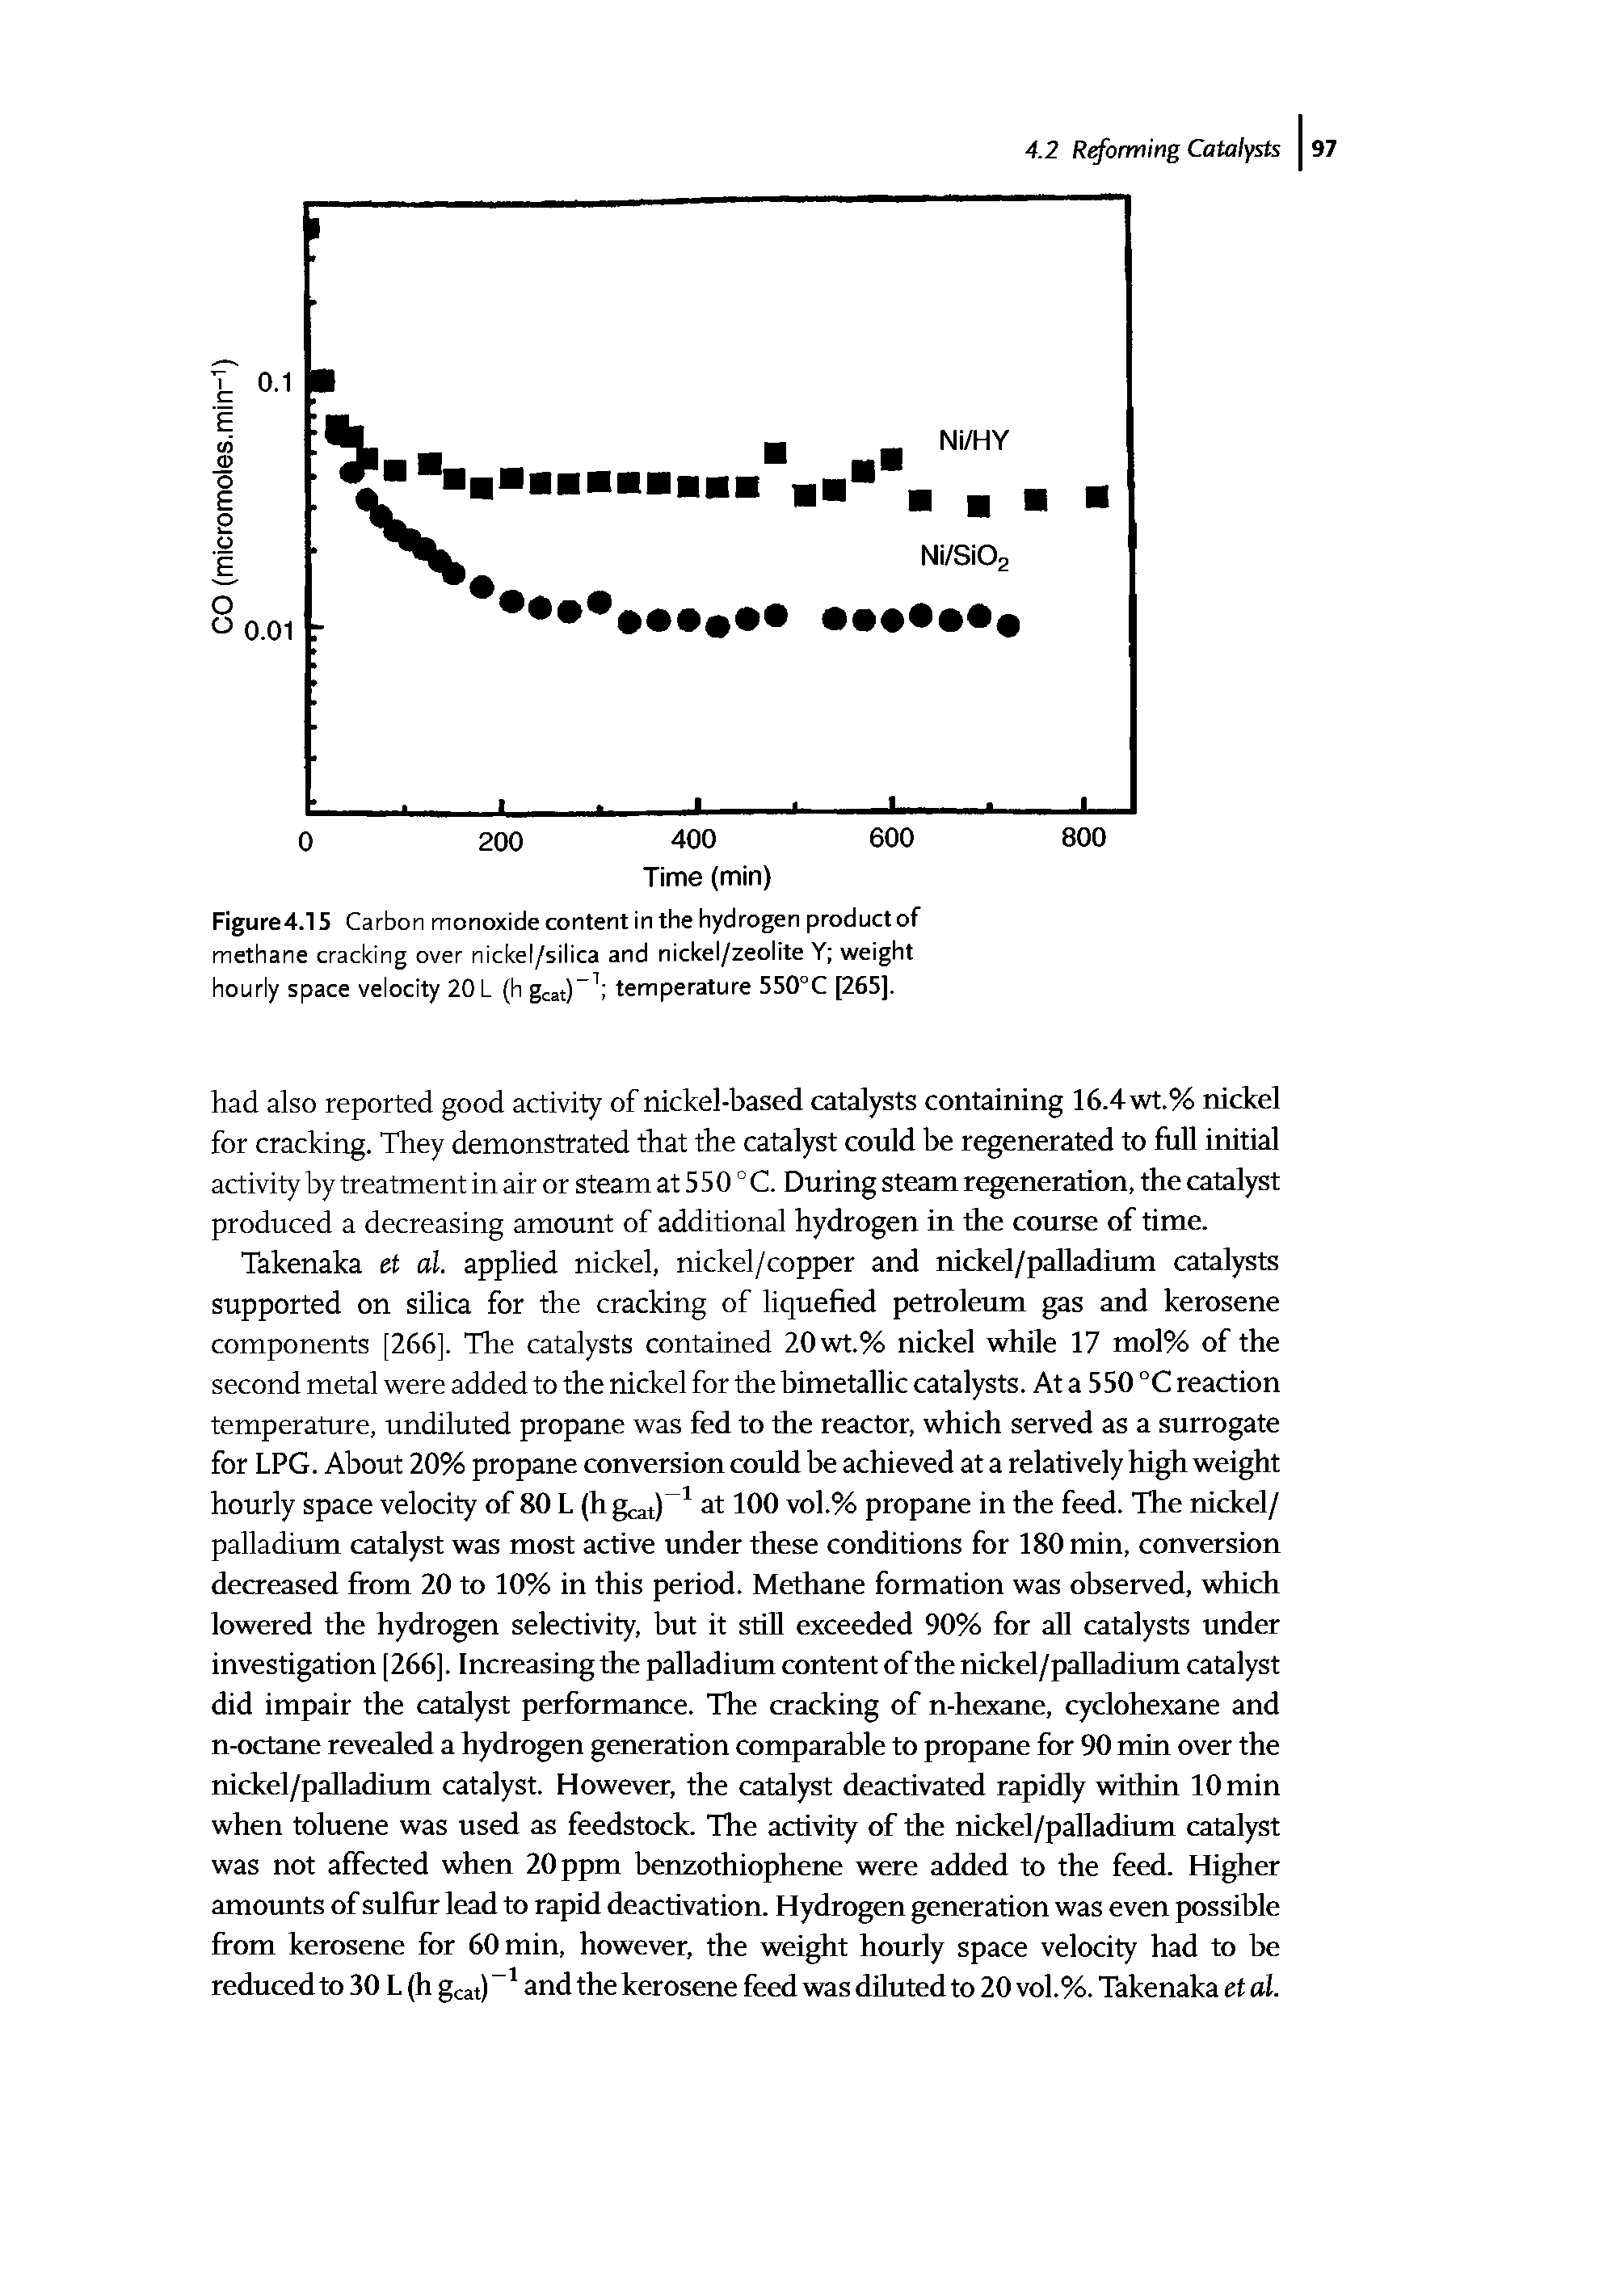 Figure4.15 Carbon monoxidecontent in the hydrogen product of methane cracking over nickel/silica and nickel/zeolite Y weight hourly space velocity 20 L (h gcat) temperature 550 C [265].